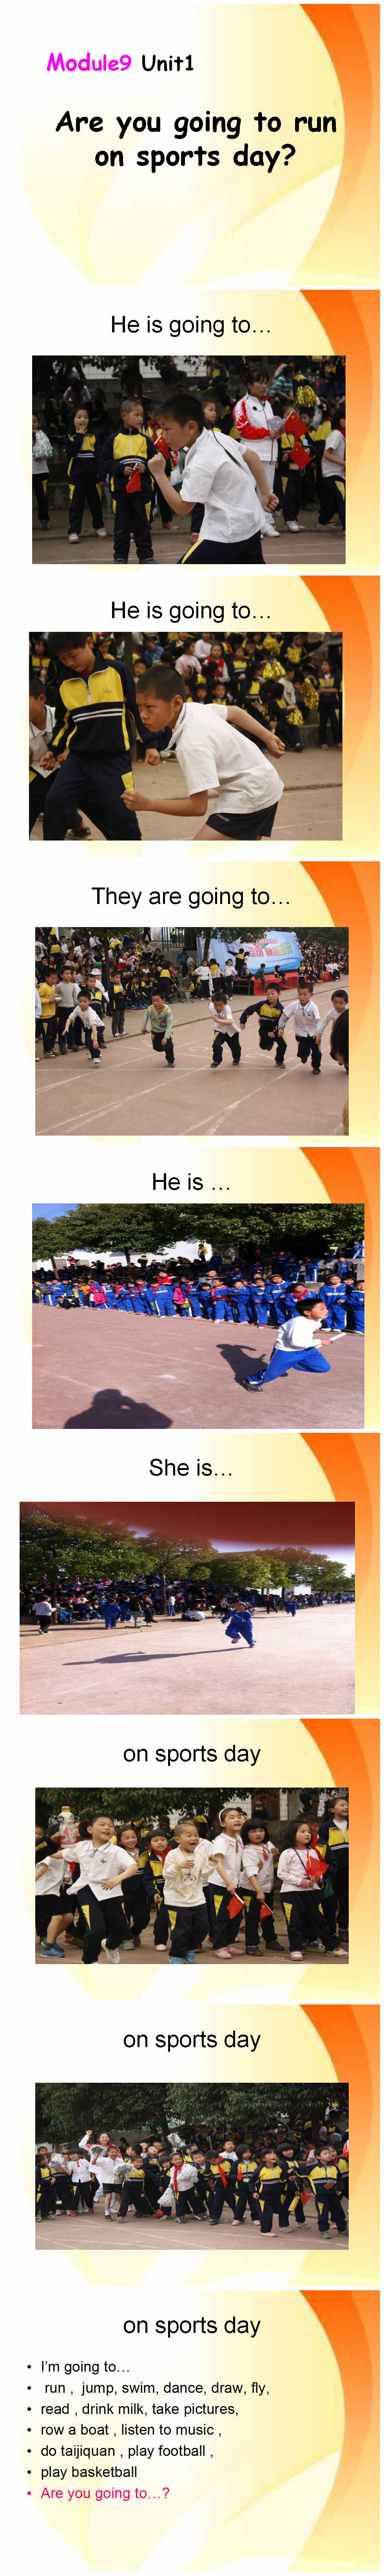 《Are you going to run on Sports Day?》PPT课件3PPT课件下载